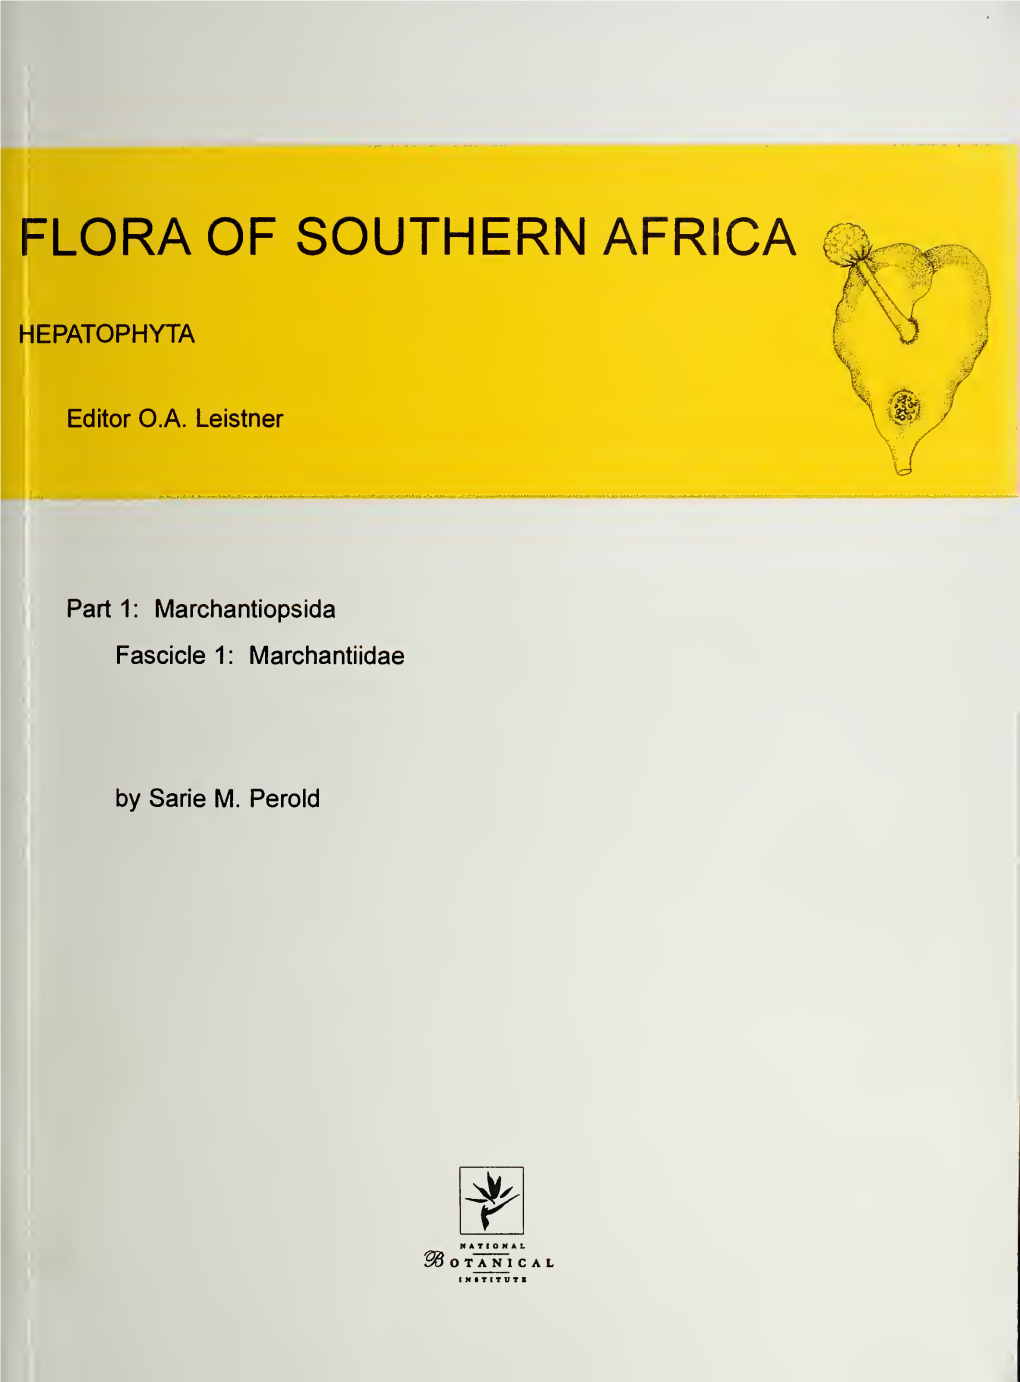 Flora of Southern Africa